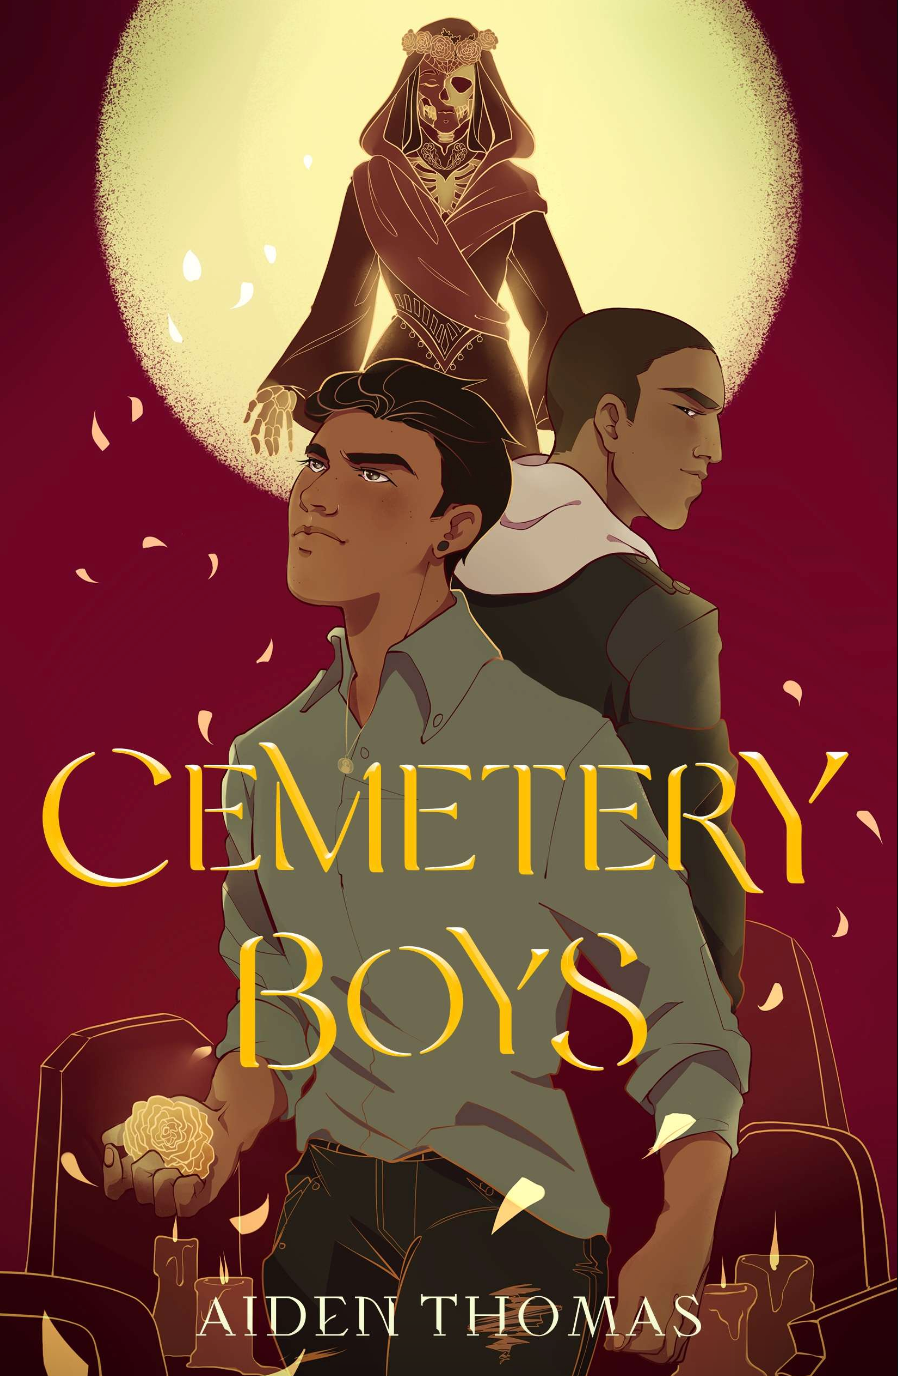 A Ghostly Gay Romance For the Ages: “Cemetery Boys” Review